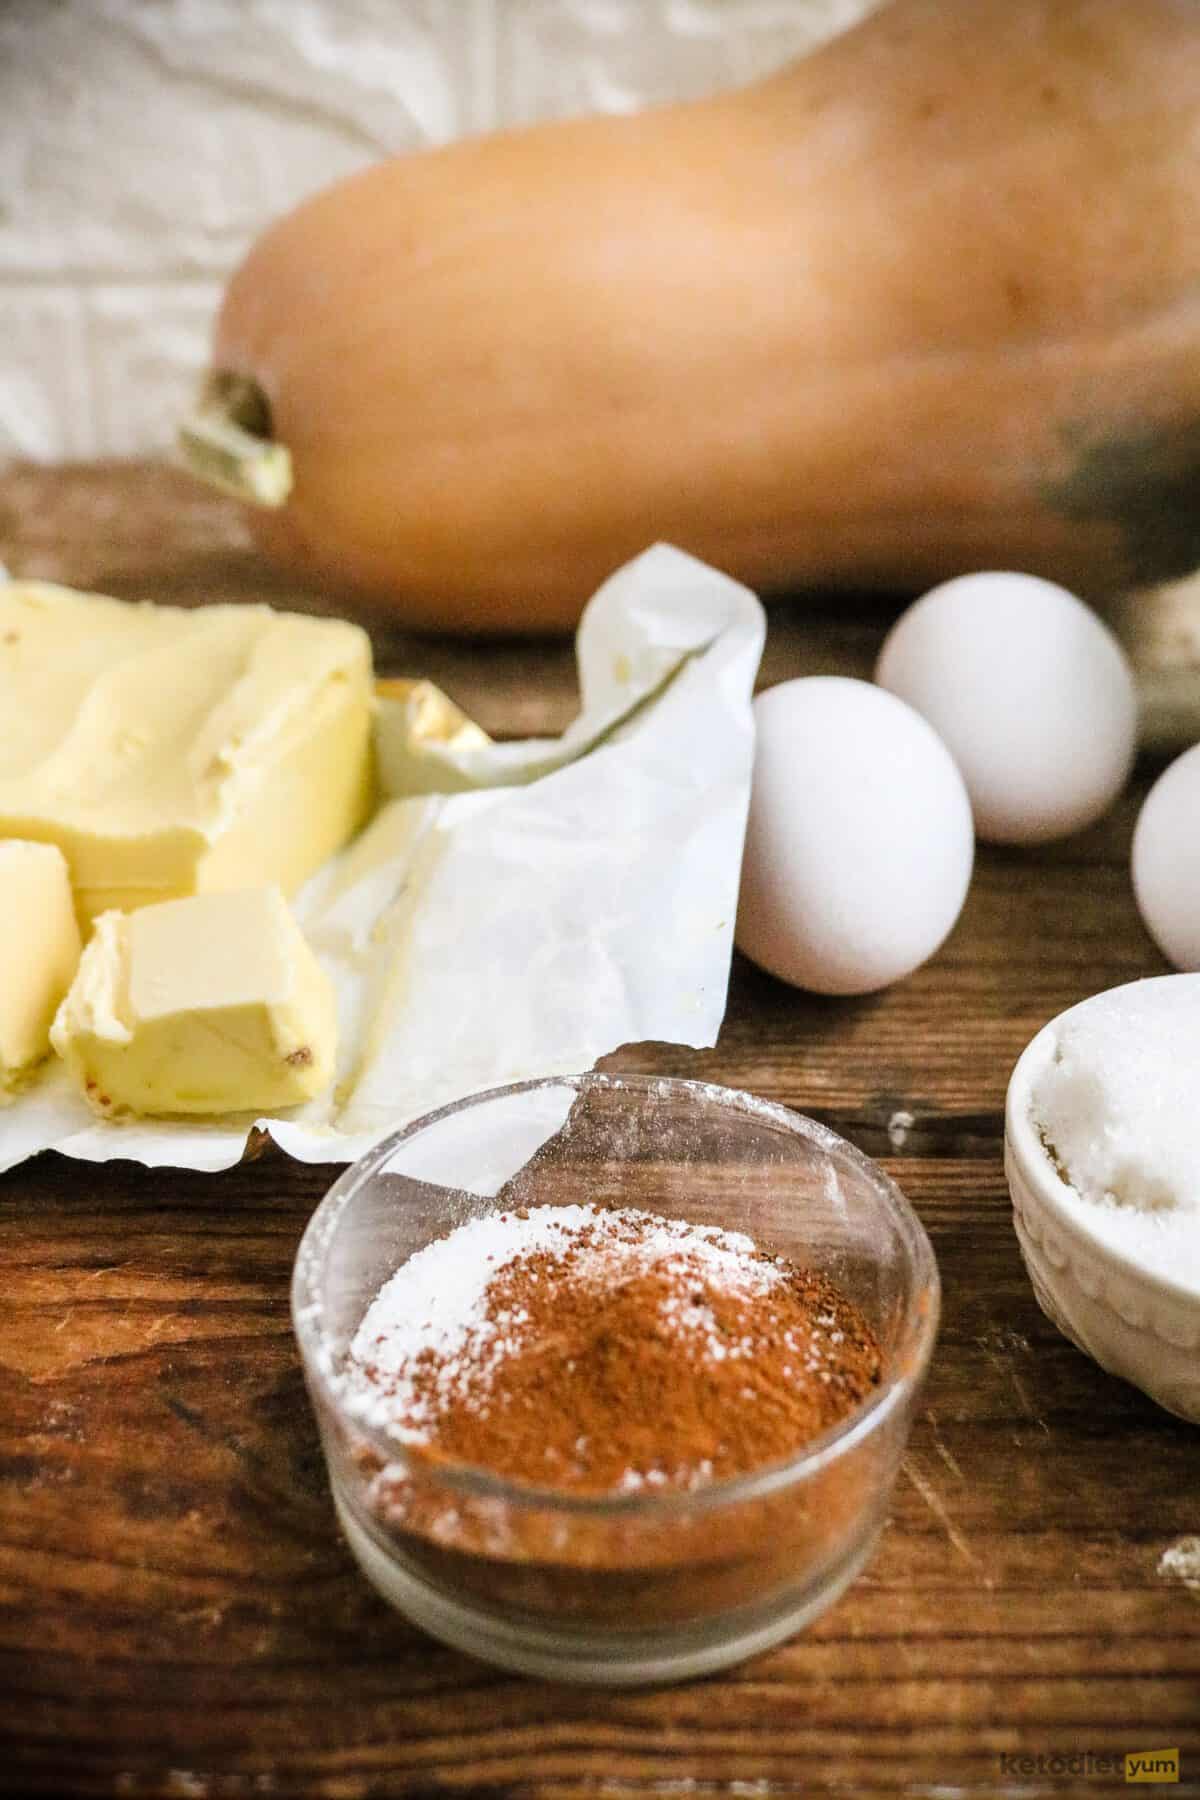 Ingredients arranged on a table to make keto pumpkin bread including pumpkin, butter, eggs, Erythritol, cream cheese, almond flour and spices